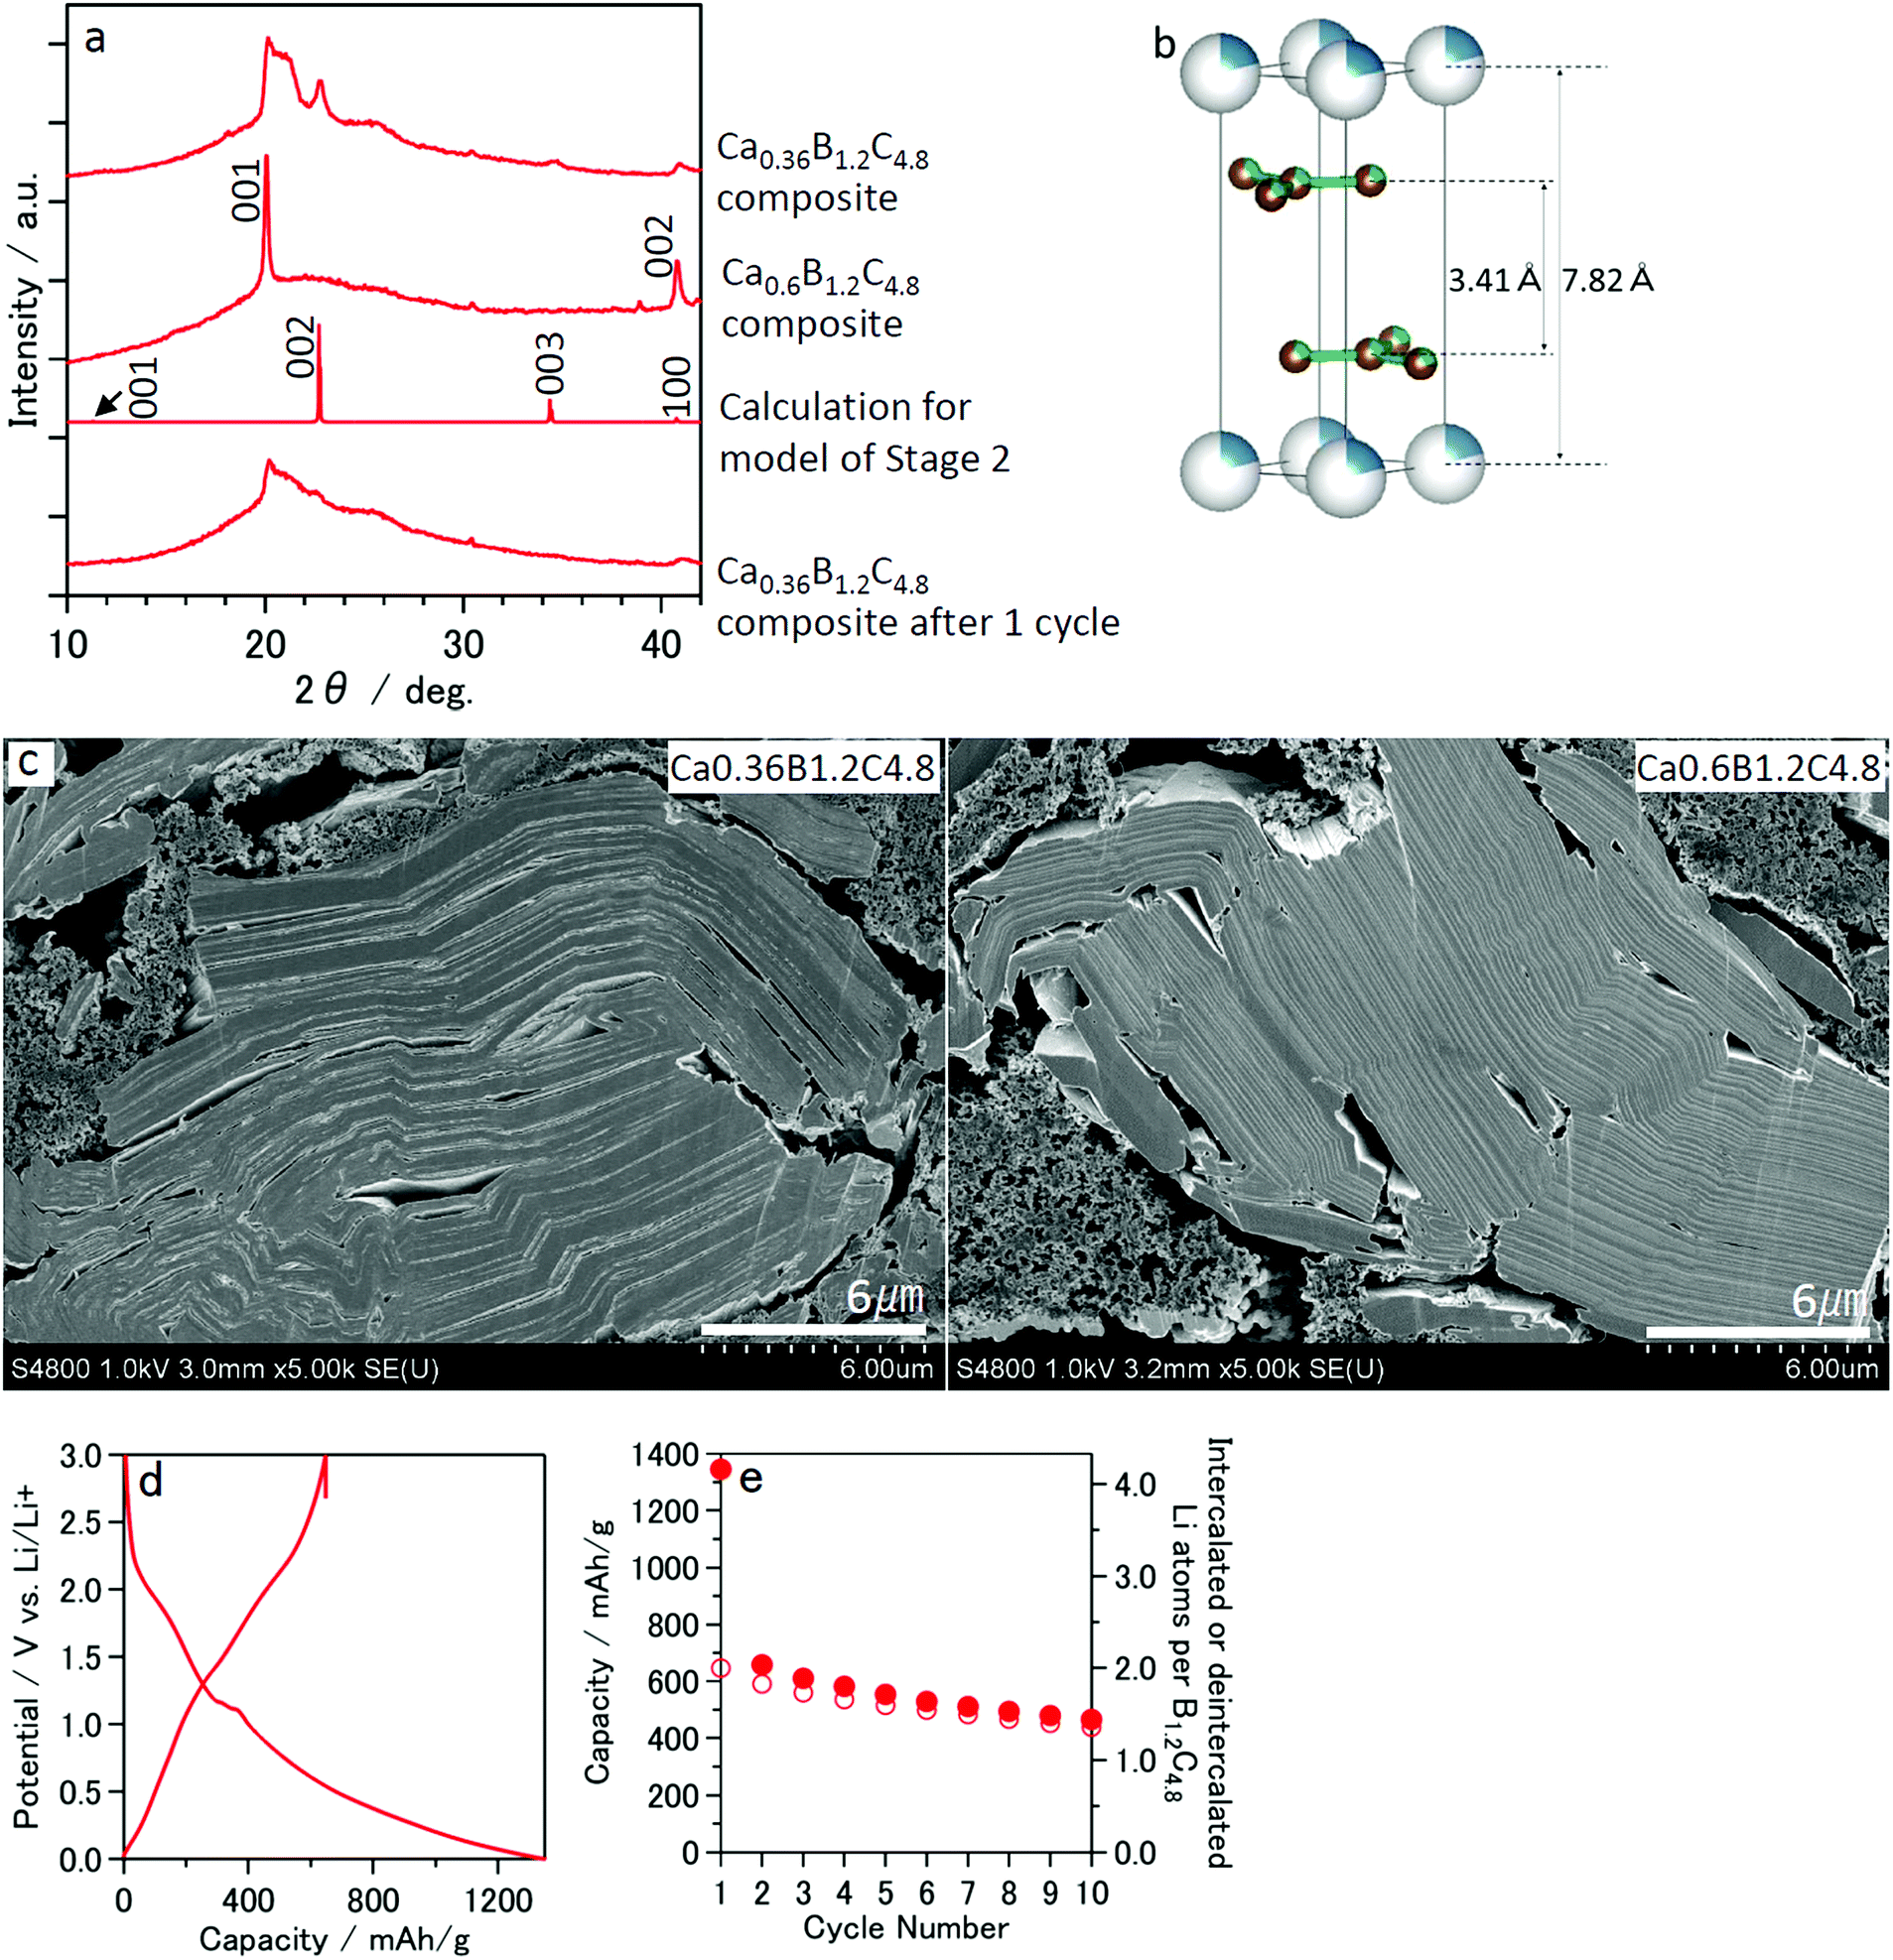 High Capacity Graphite Like Calcium Boridecarbides As A Novel Anode Active Material For Lithium Ion Batteries Sustainable Energy Fuels Rsc Publishing